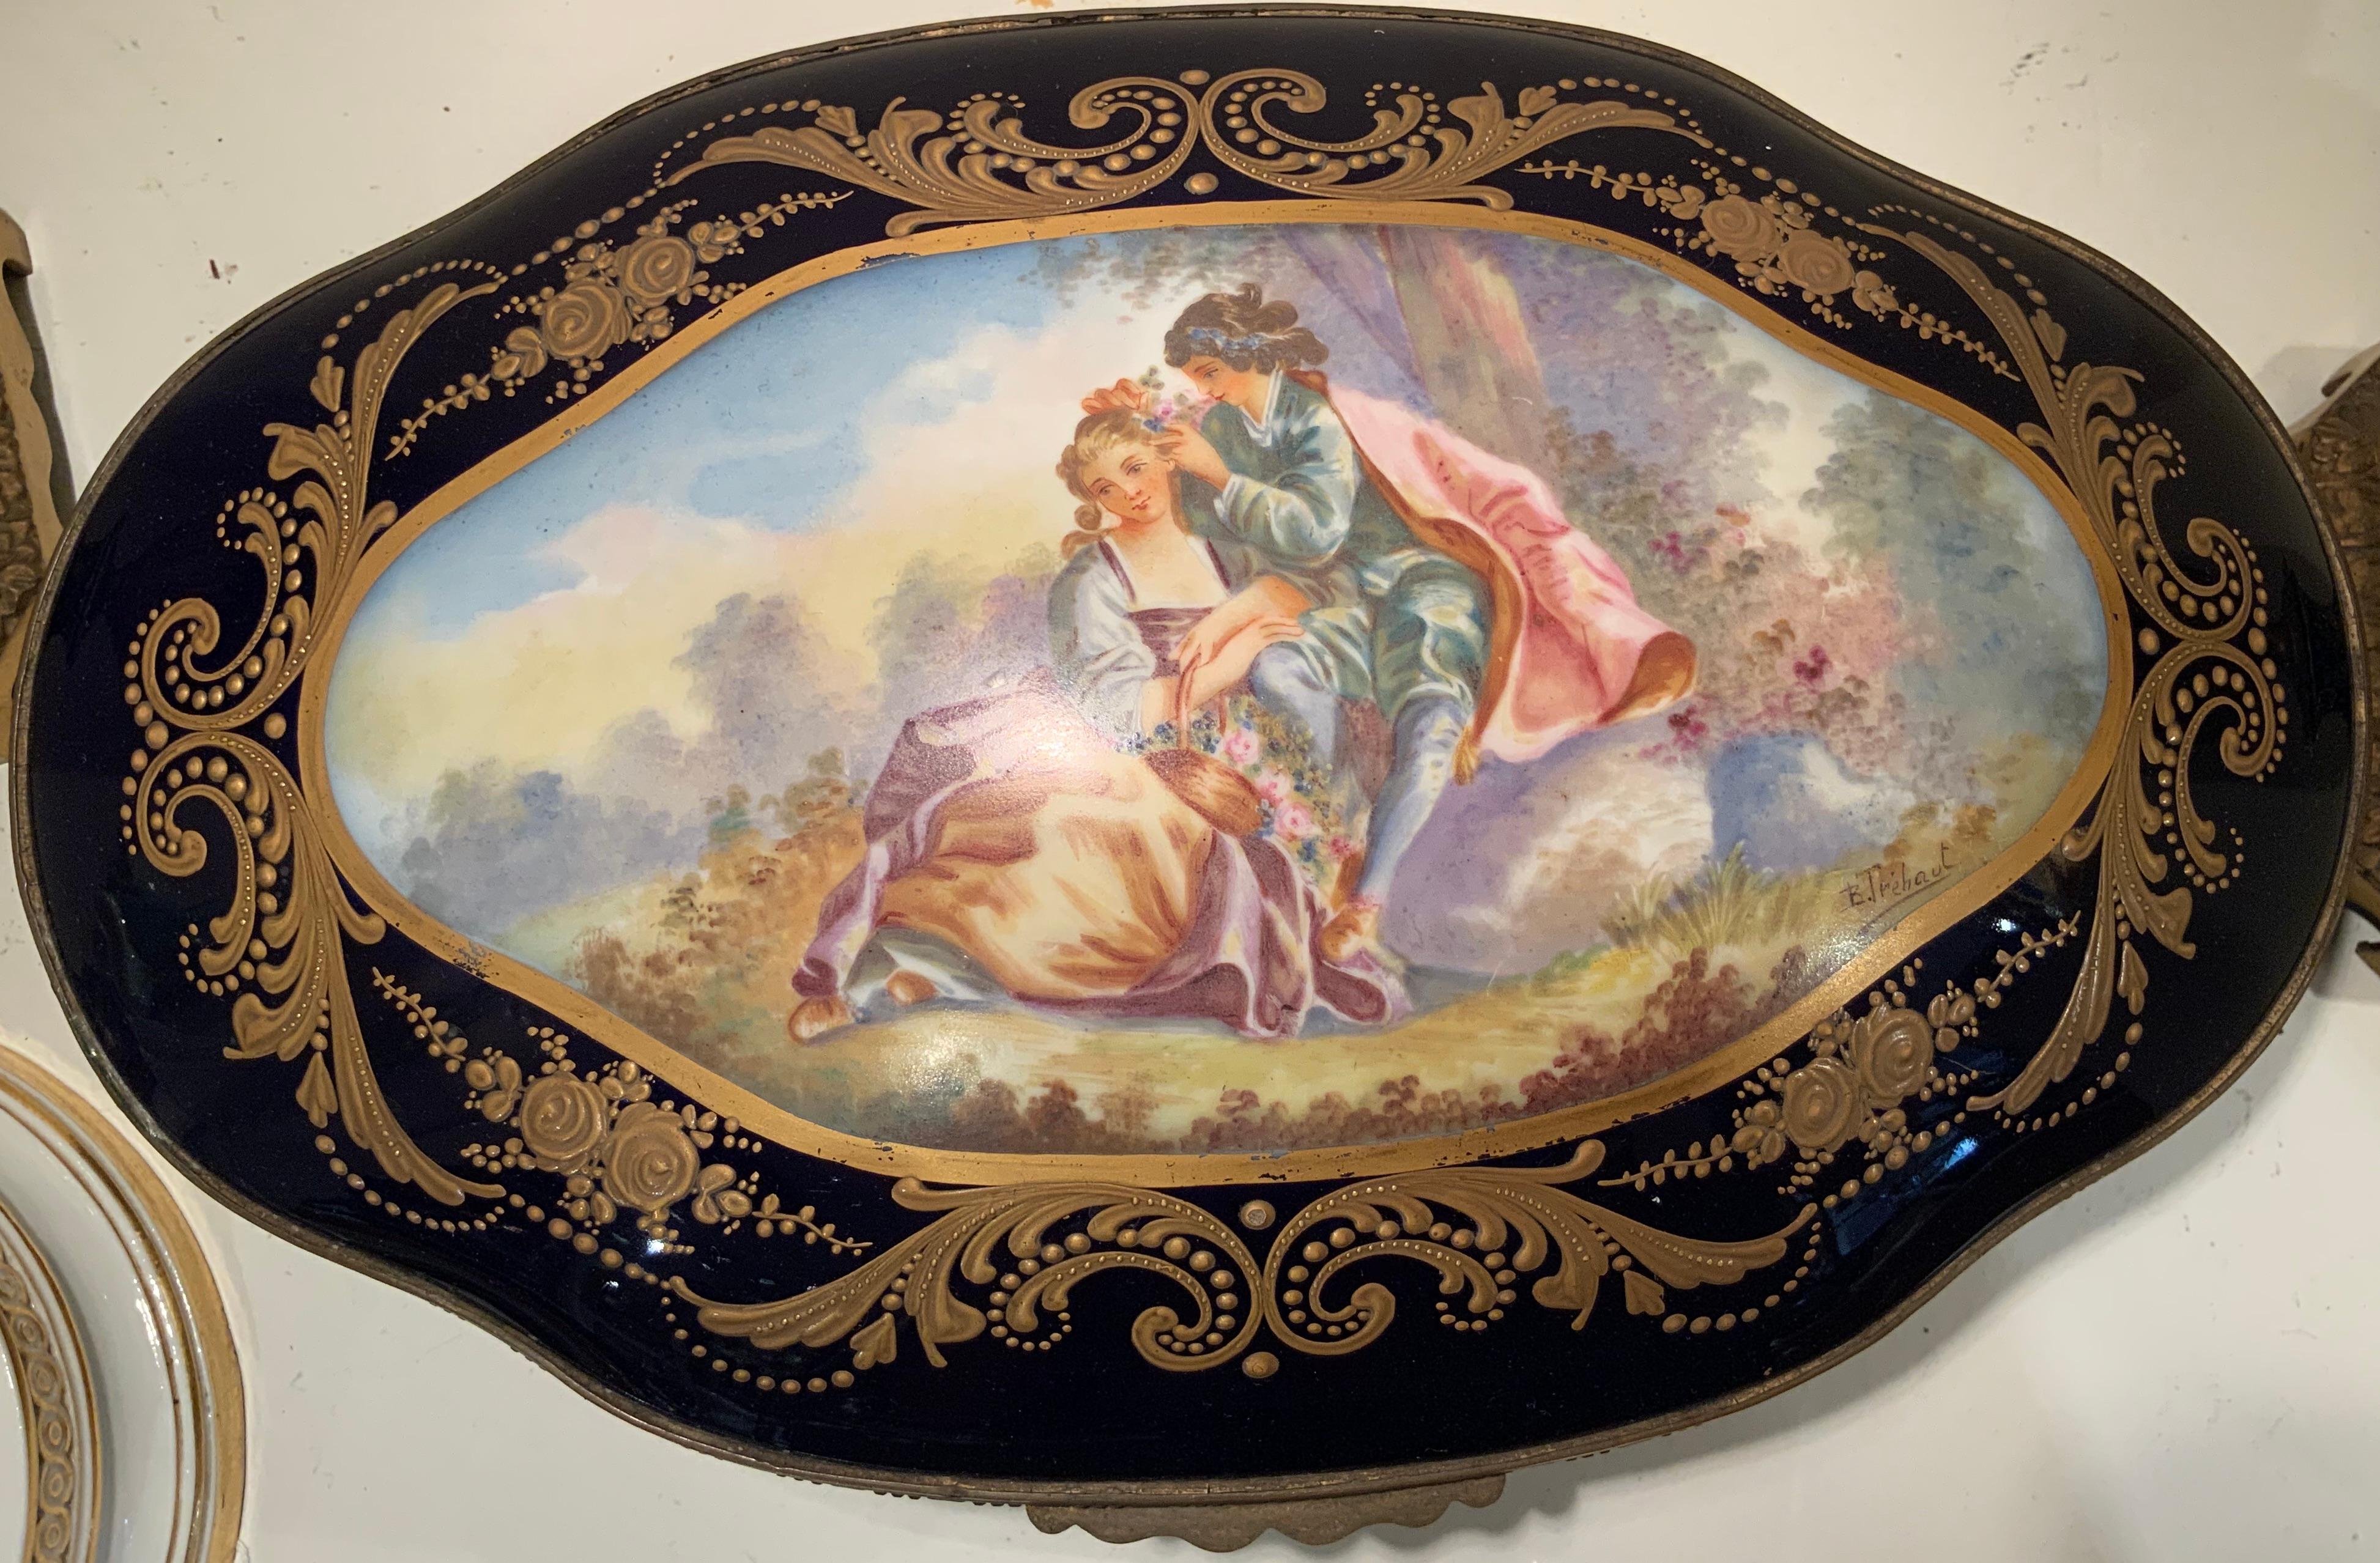 A background of dark cobalt blue with gilding details of scrolls and dots alternated with roses and foliage decorate this vanity box. The dome aspect of the lid features a hand painted romantic pastoral scene of a couple signed by B. Tre’haut. The